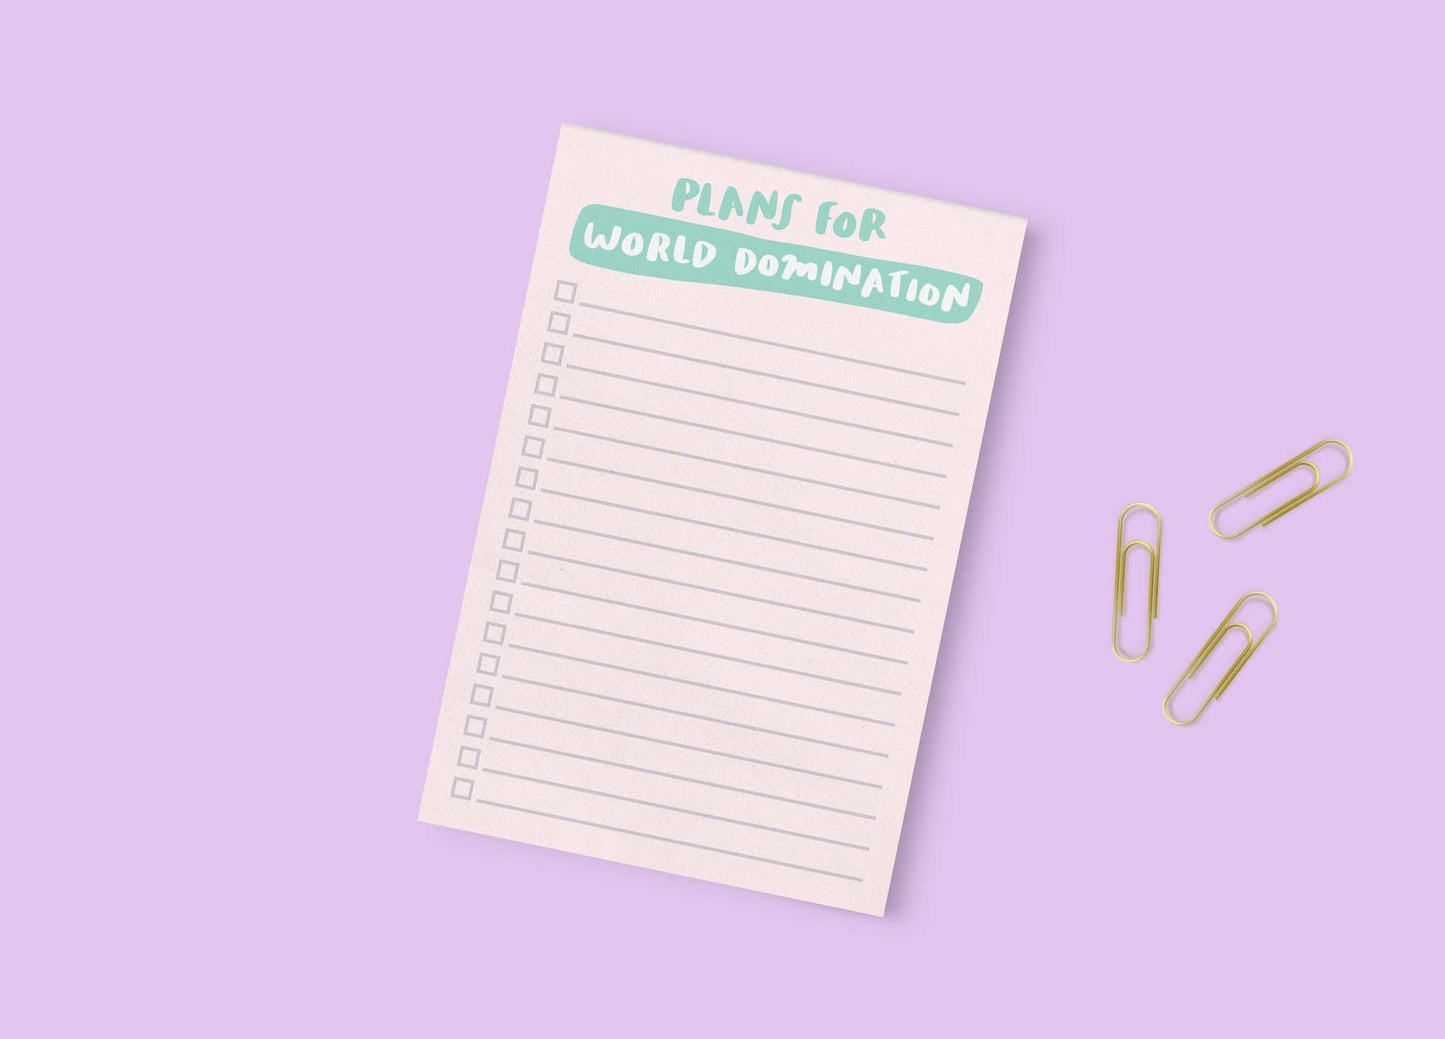 Plans for World Domination Notepad